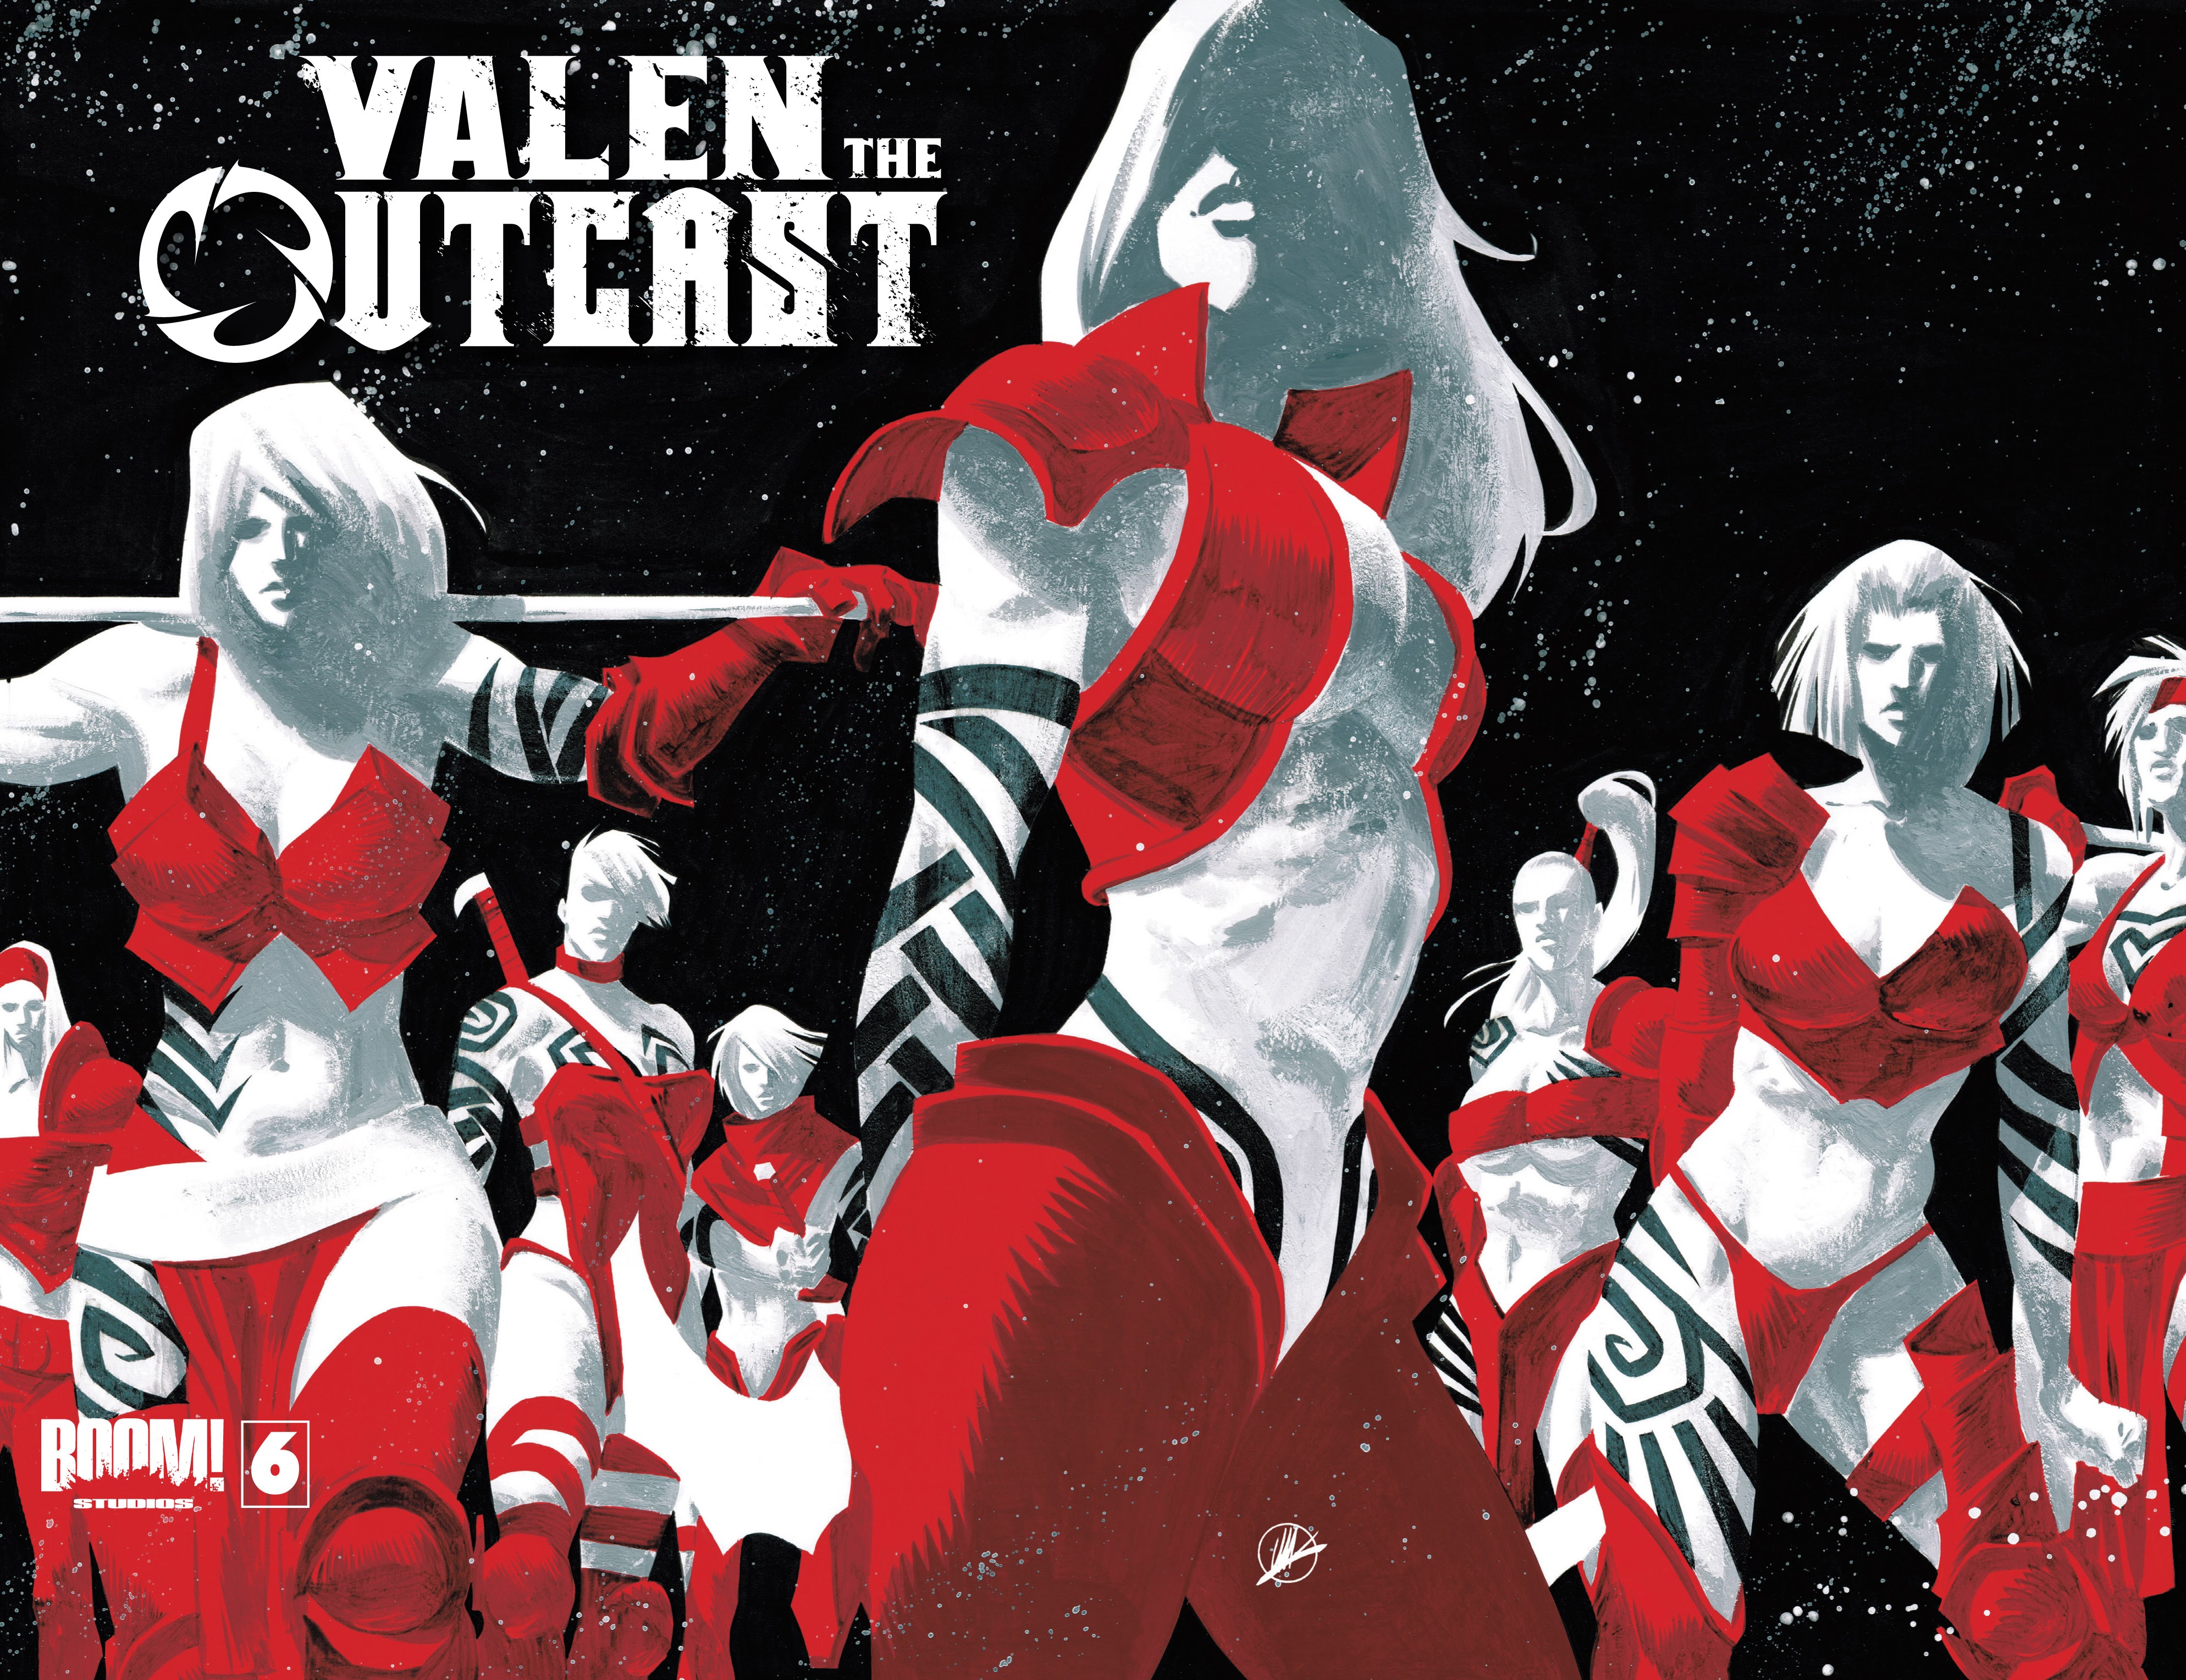 Read online Valen the Outcast comic -  Issue #6 - 3